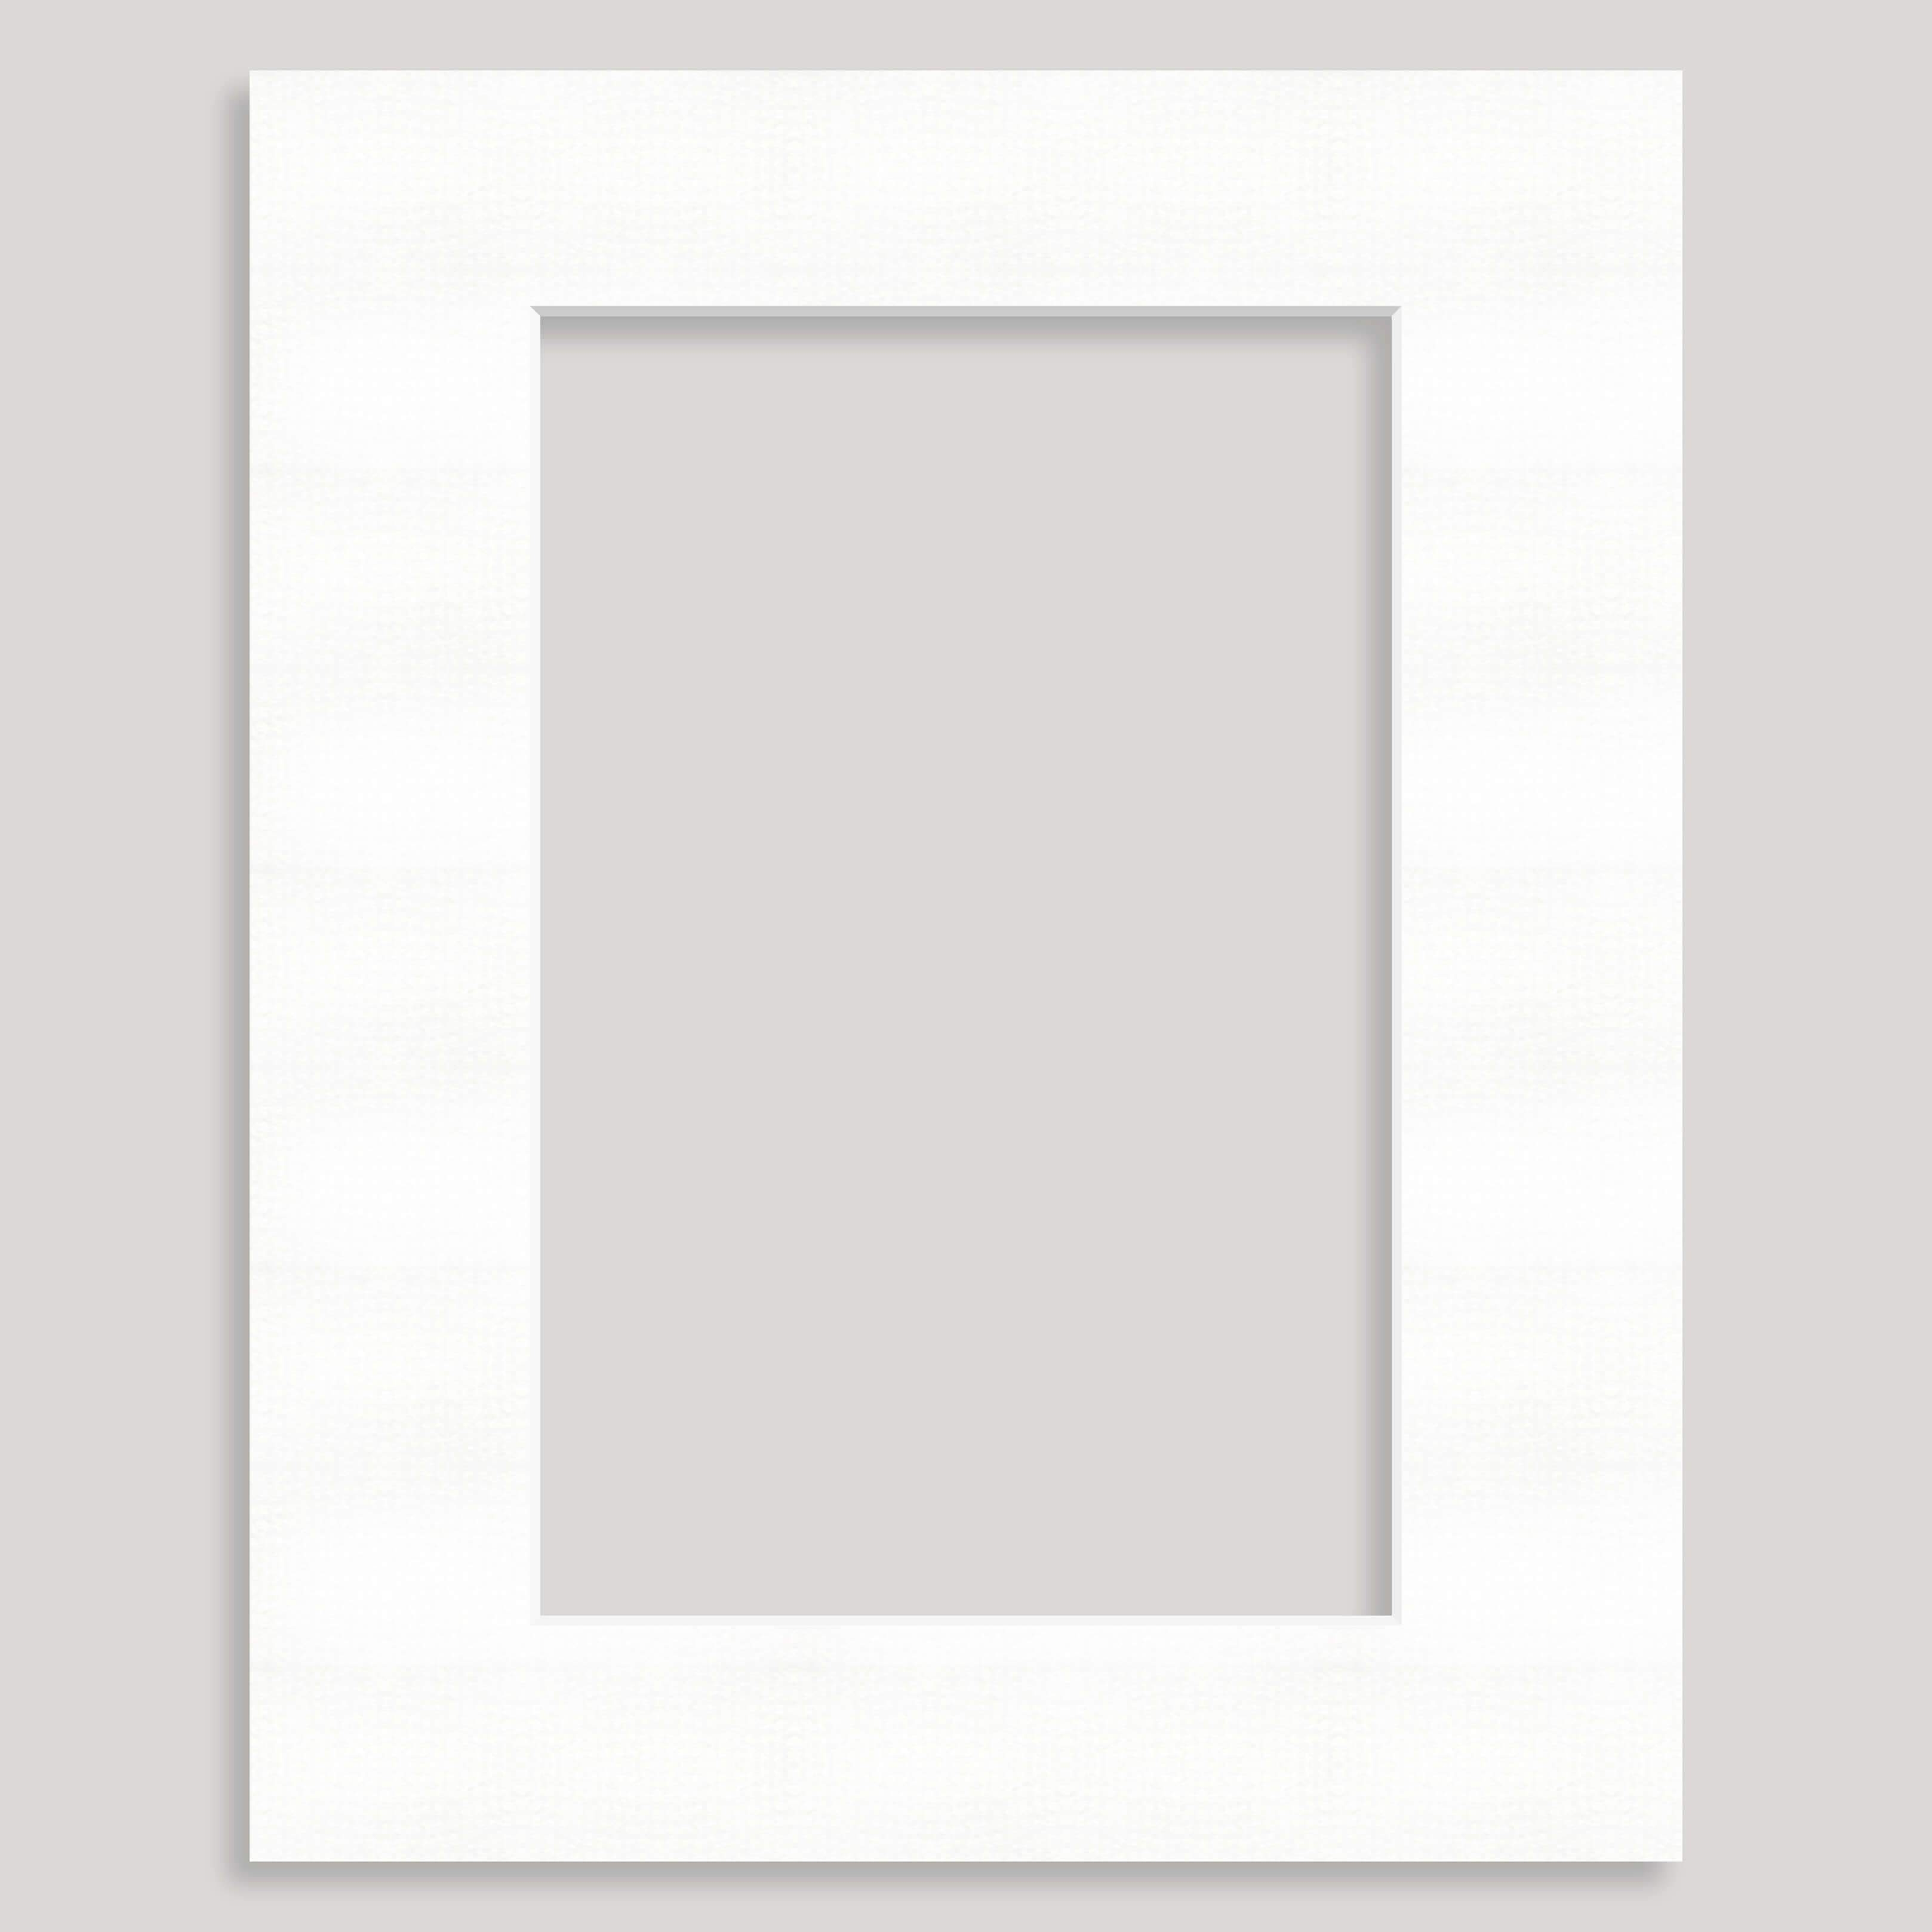 10x8inch Photo/Picture Mount for a 7.5x5inch Picture/Photo (individually bagged) – 8698 Glacier White